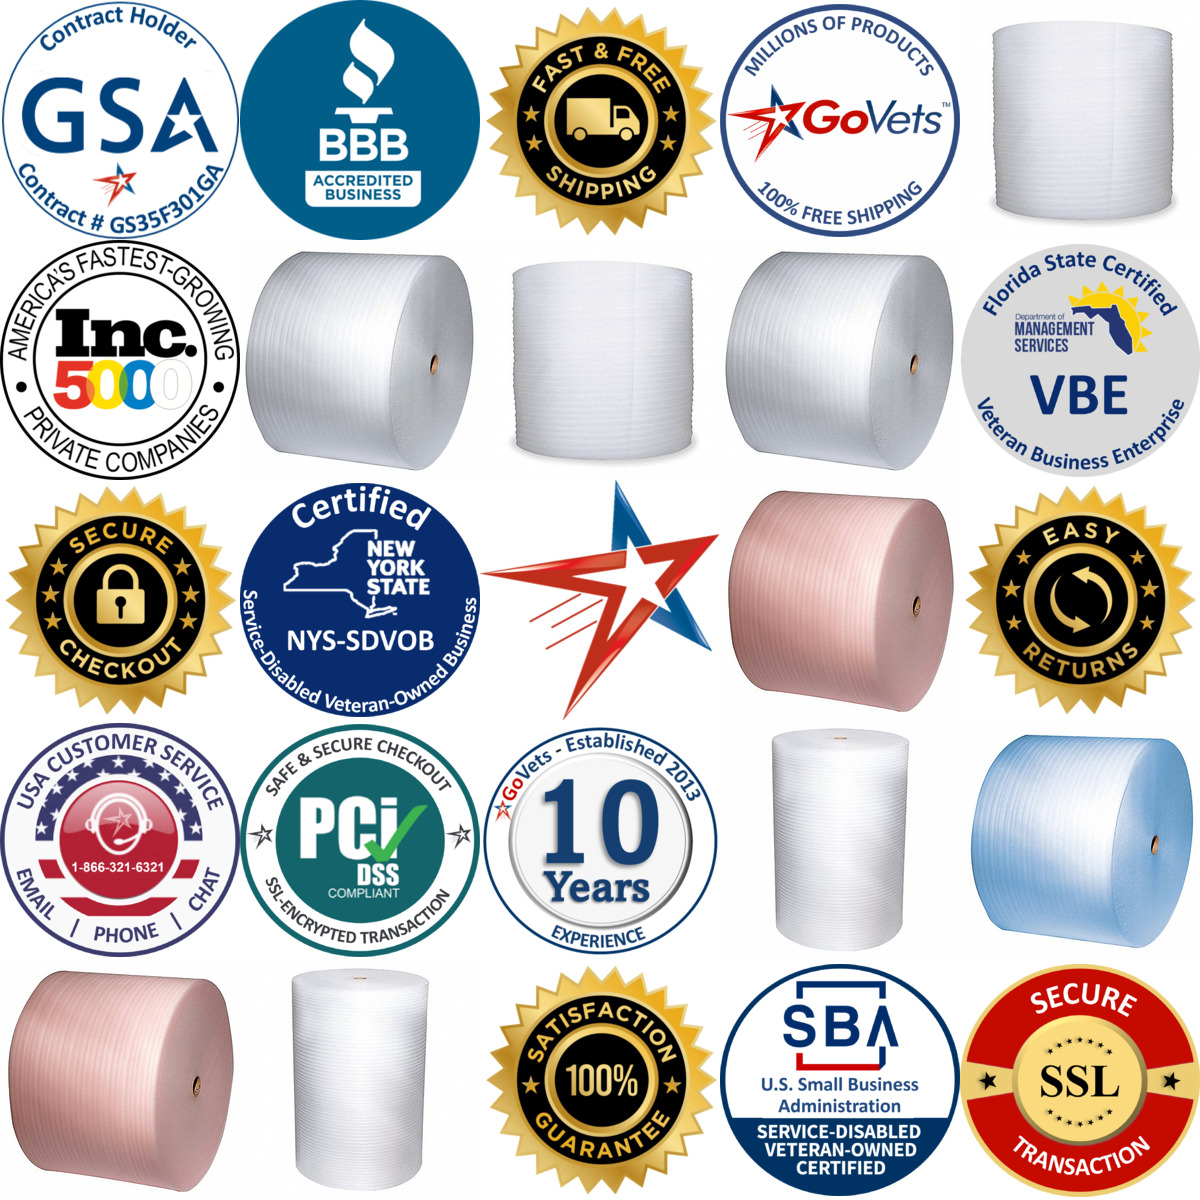 A selection of Packing Foam Rolls products on GoVets